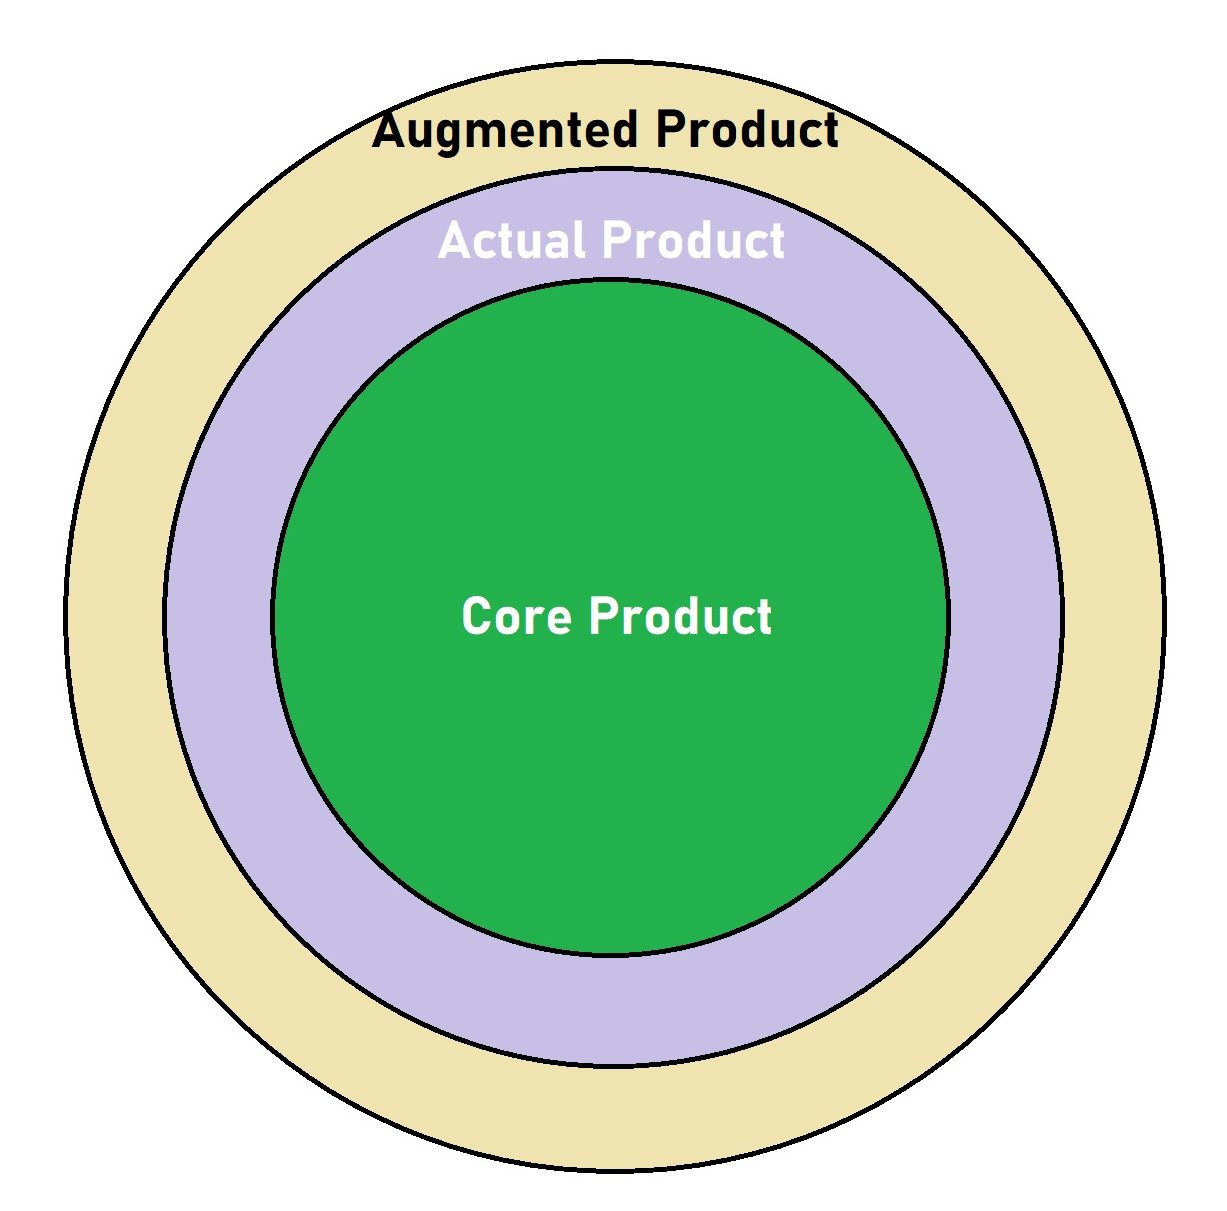 Concentric circles. From inner to outer circle: core product, actual product, and augmented product.